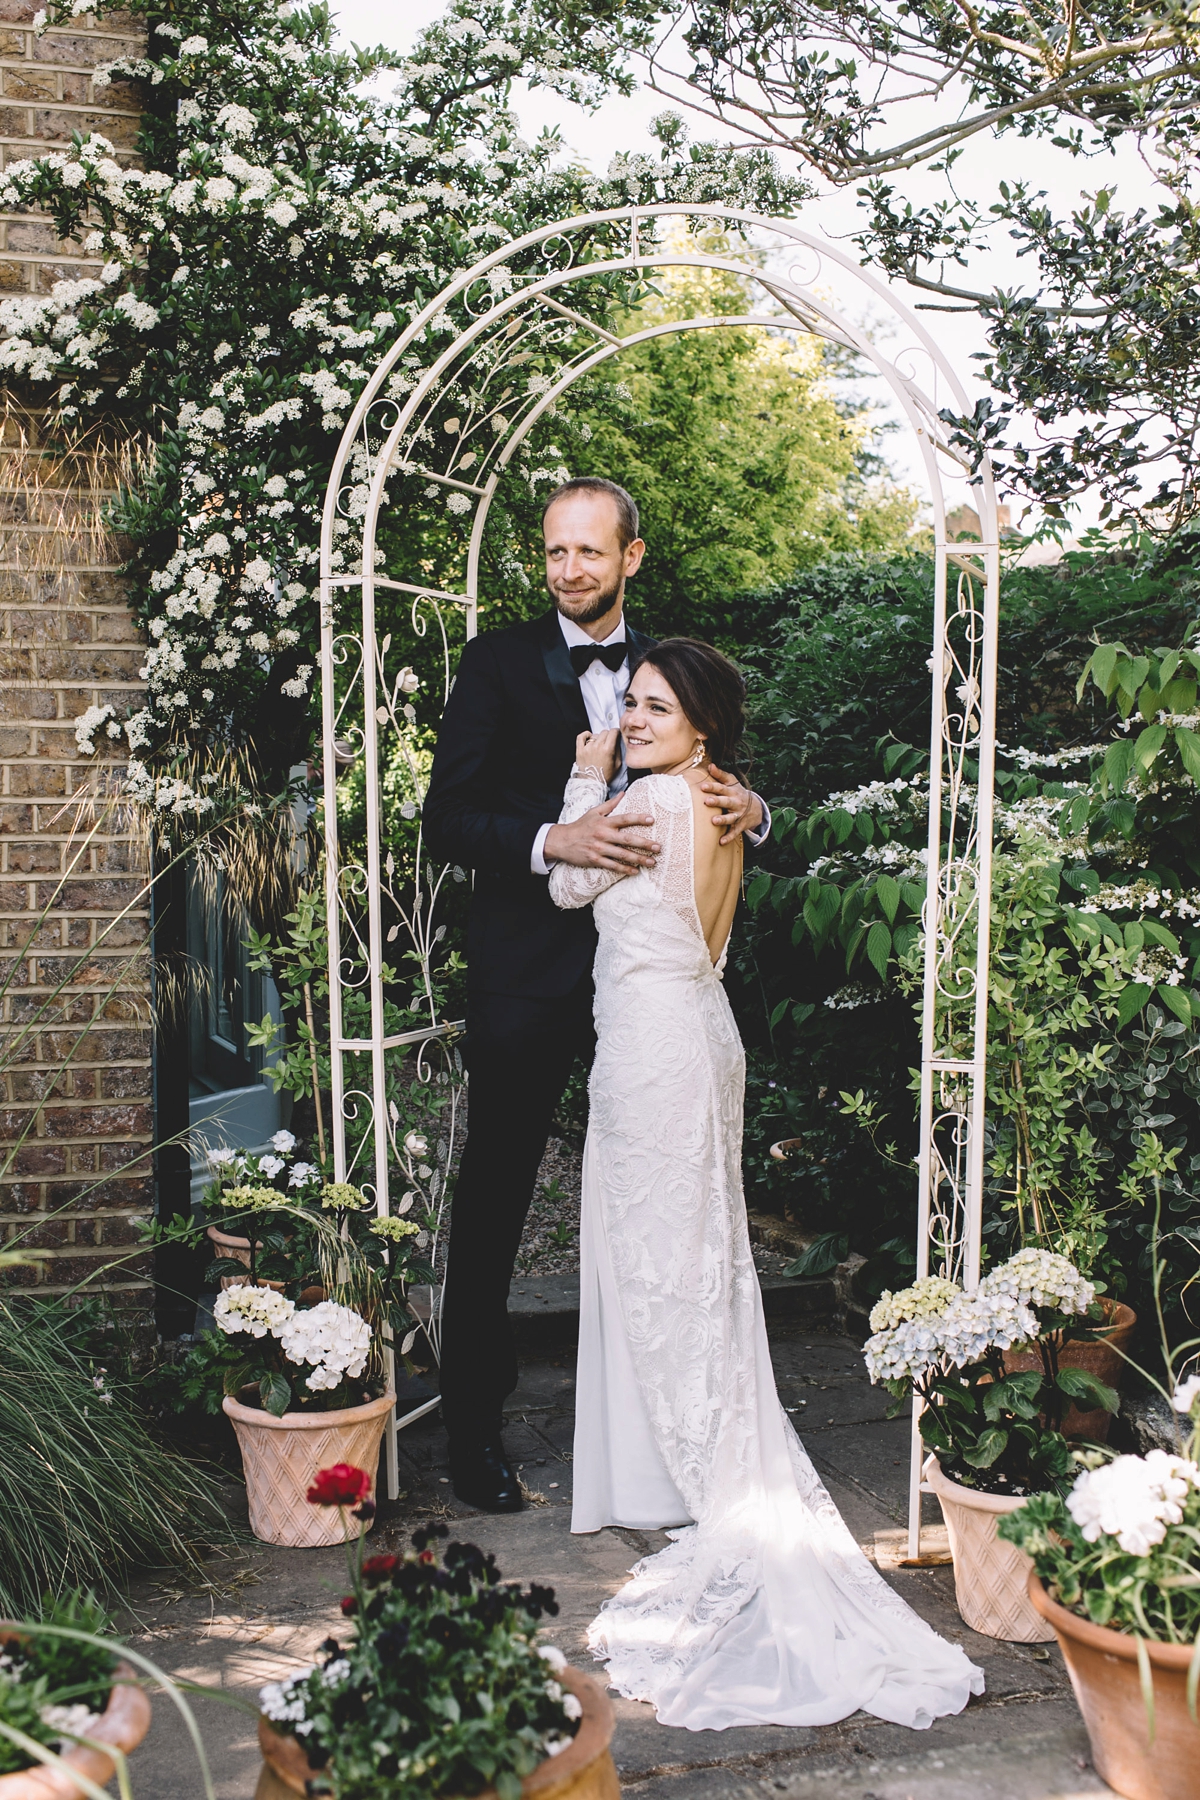 27 A Grace Loves Lace gown for a DIY garden wedding inspired by nature and flowers